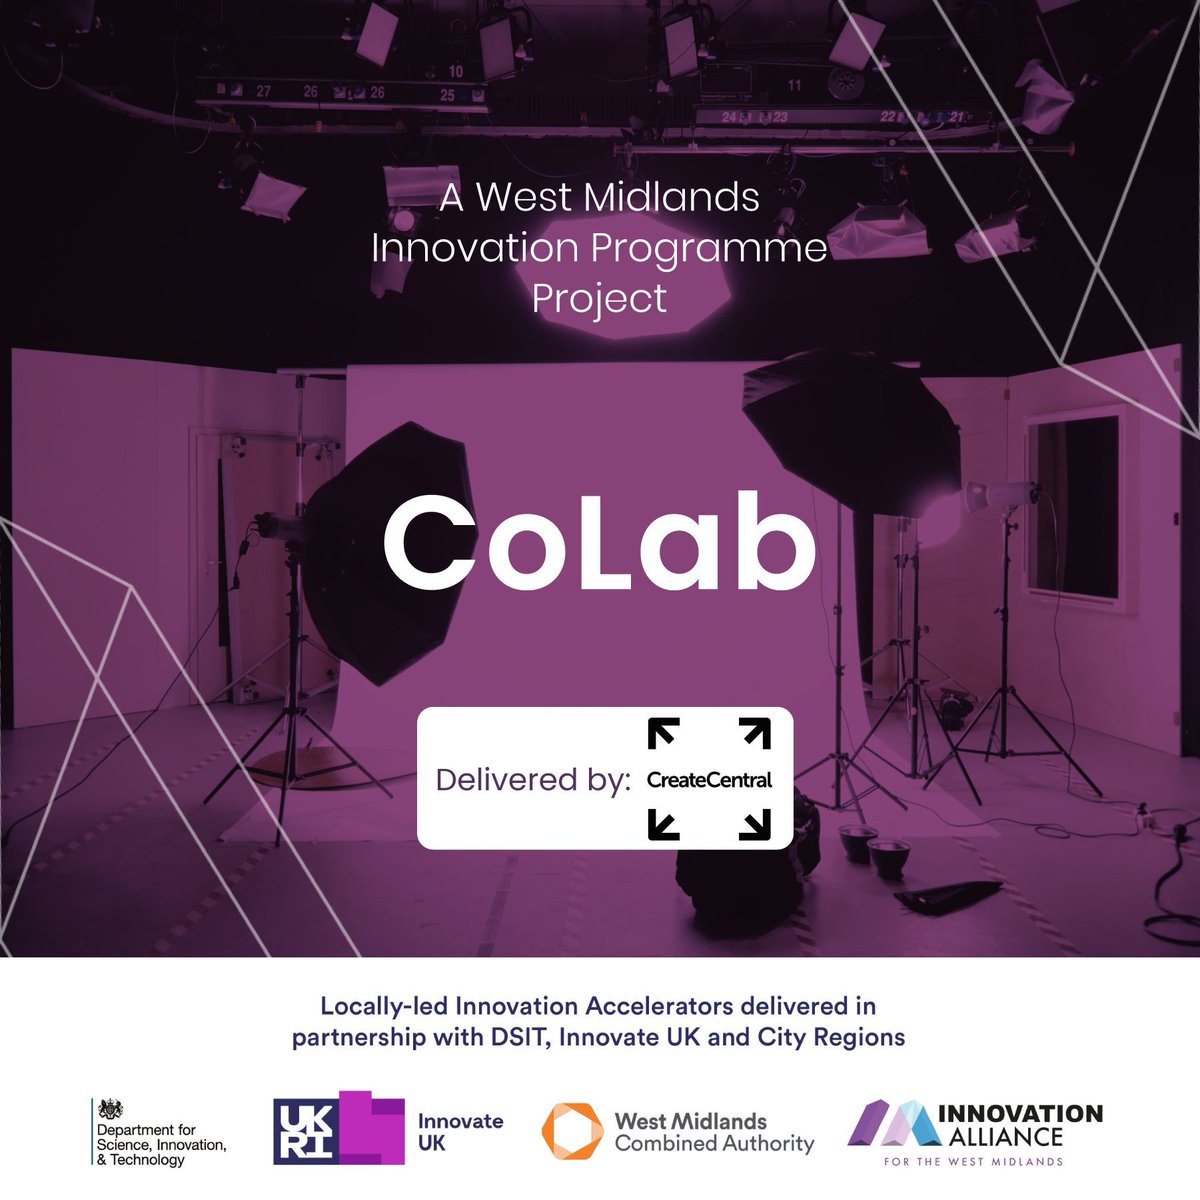 ✅ Are you a small business in creative content production or gaming? CoLab is here to help you grow & innovate! Our new R&D support programme is designed to empower businesses like yours to develop new products & services and tap into new markets. 🔗 buff.ly/3WjYDQo